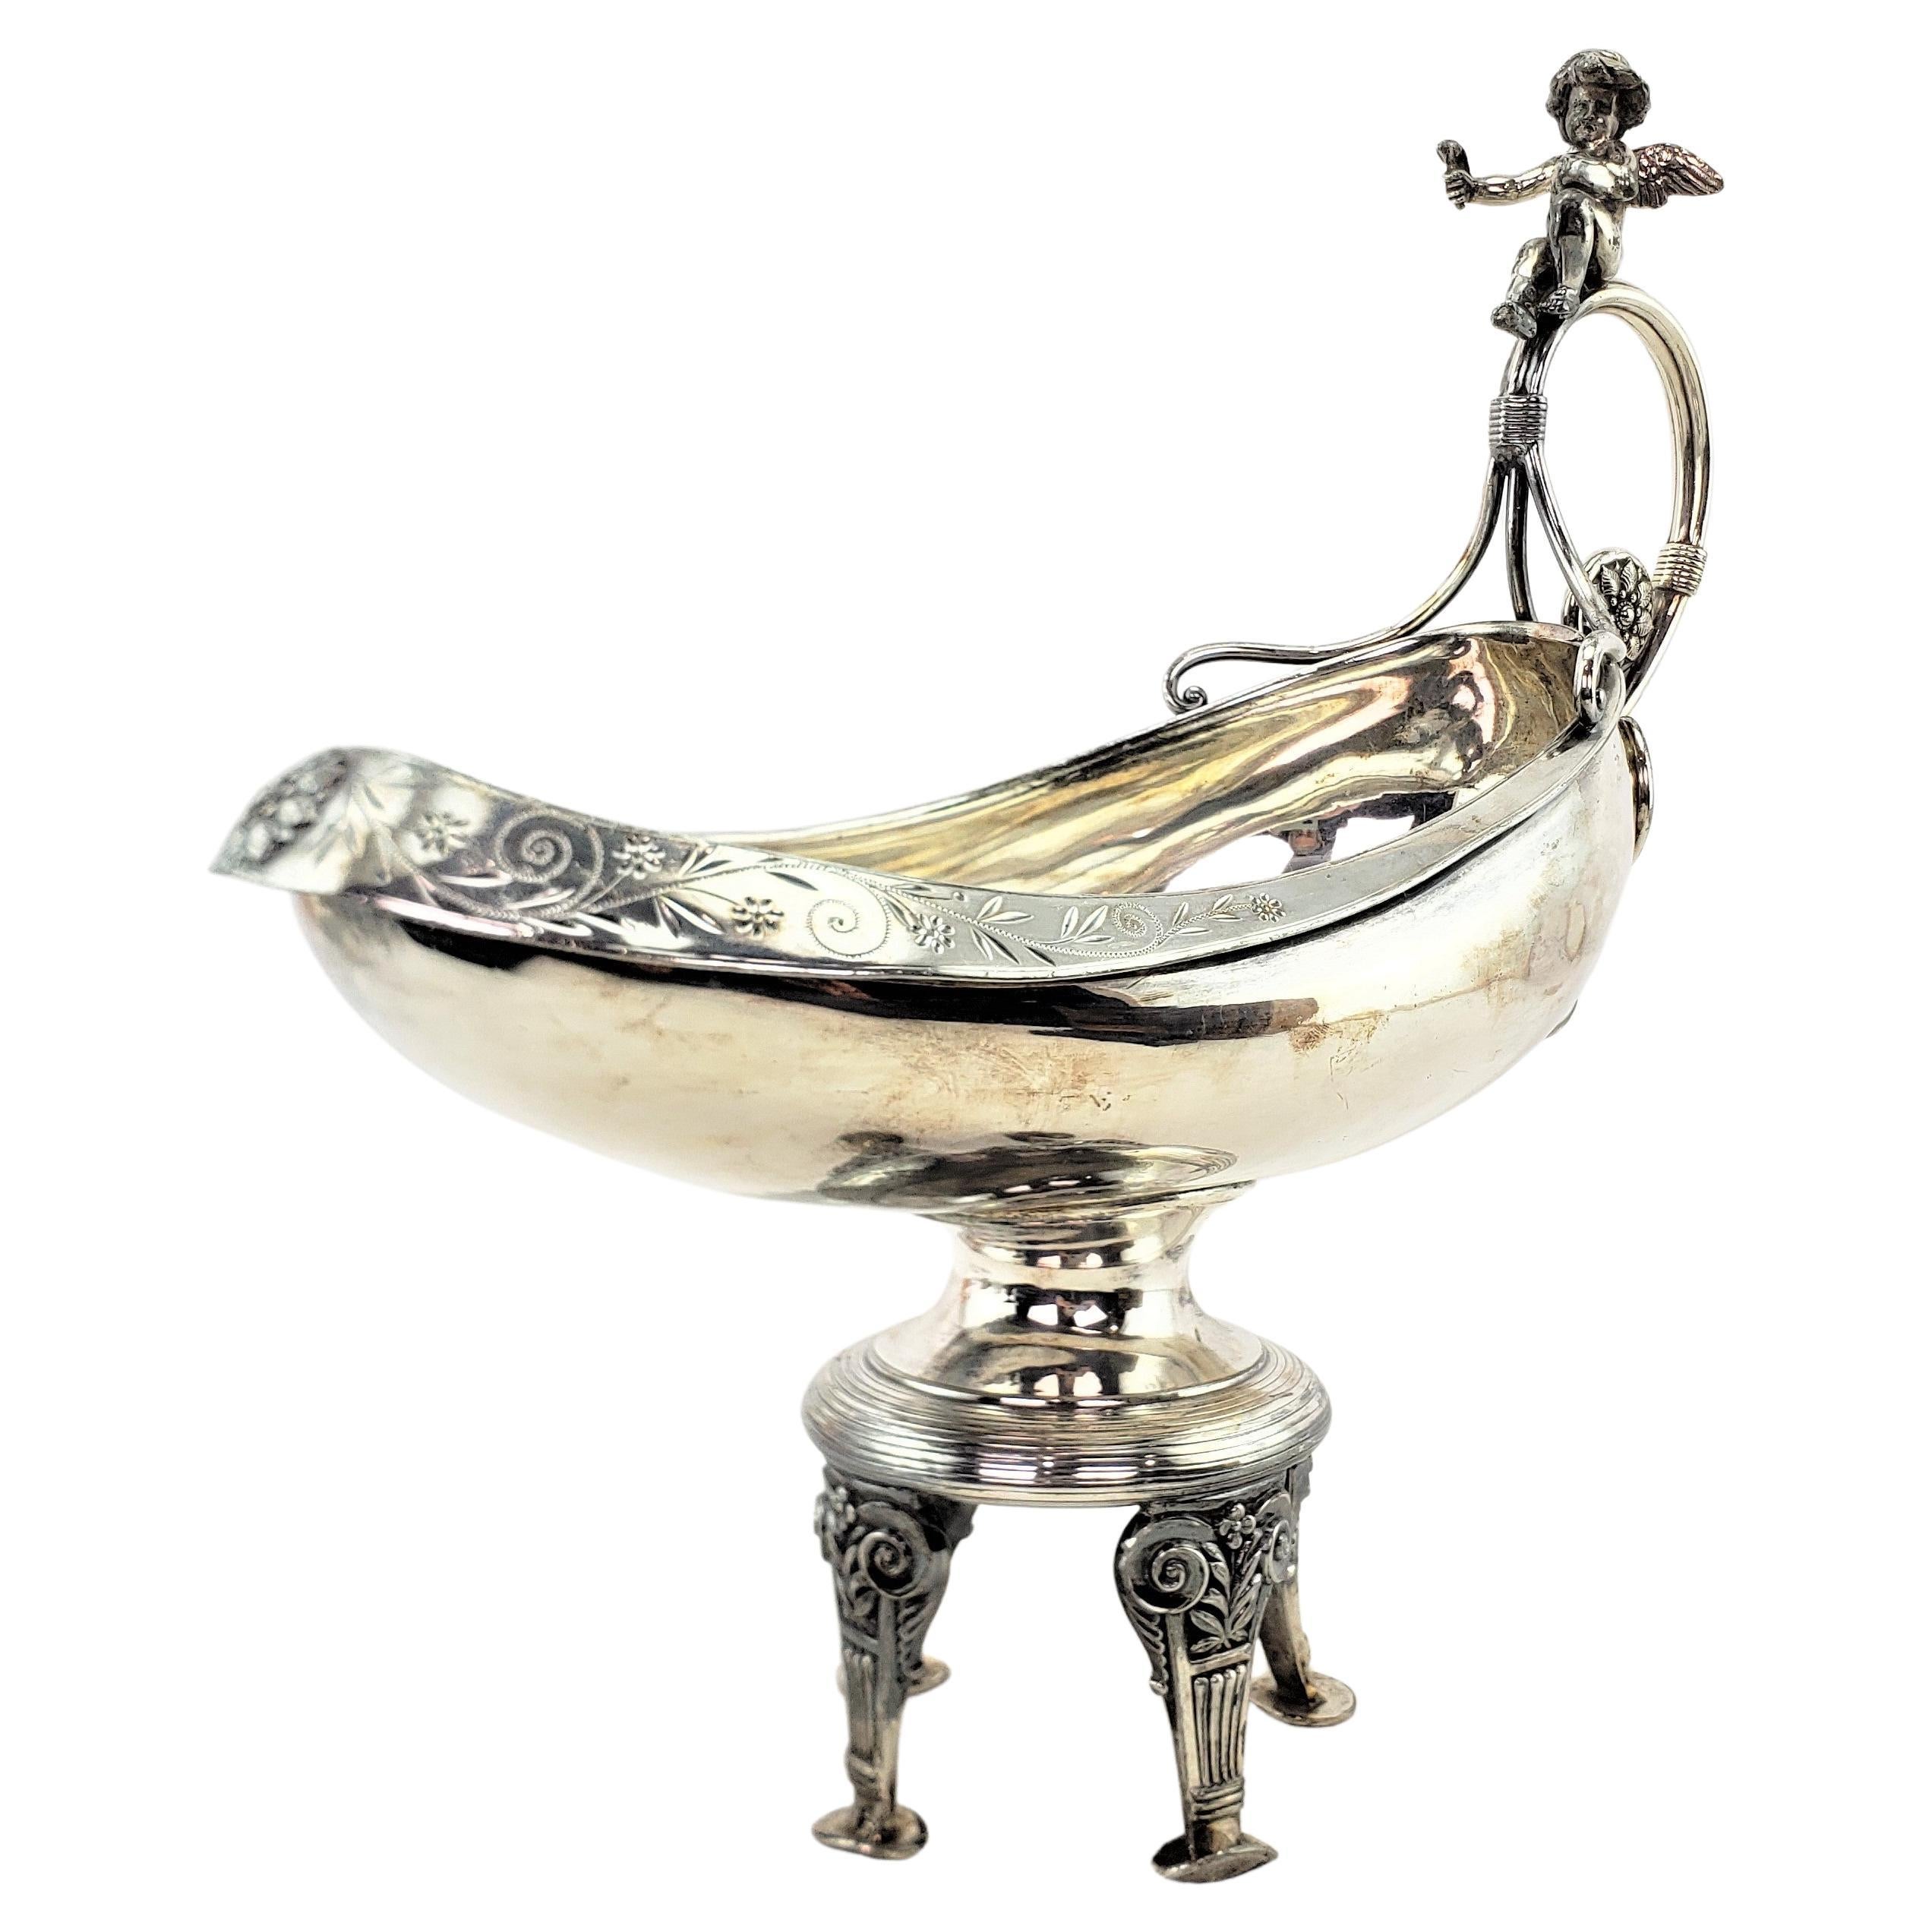 Antique Silver Plated Centerpiece Bowl with Figural Cherub & Floral Engraving For Sale